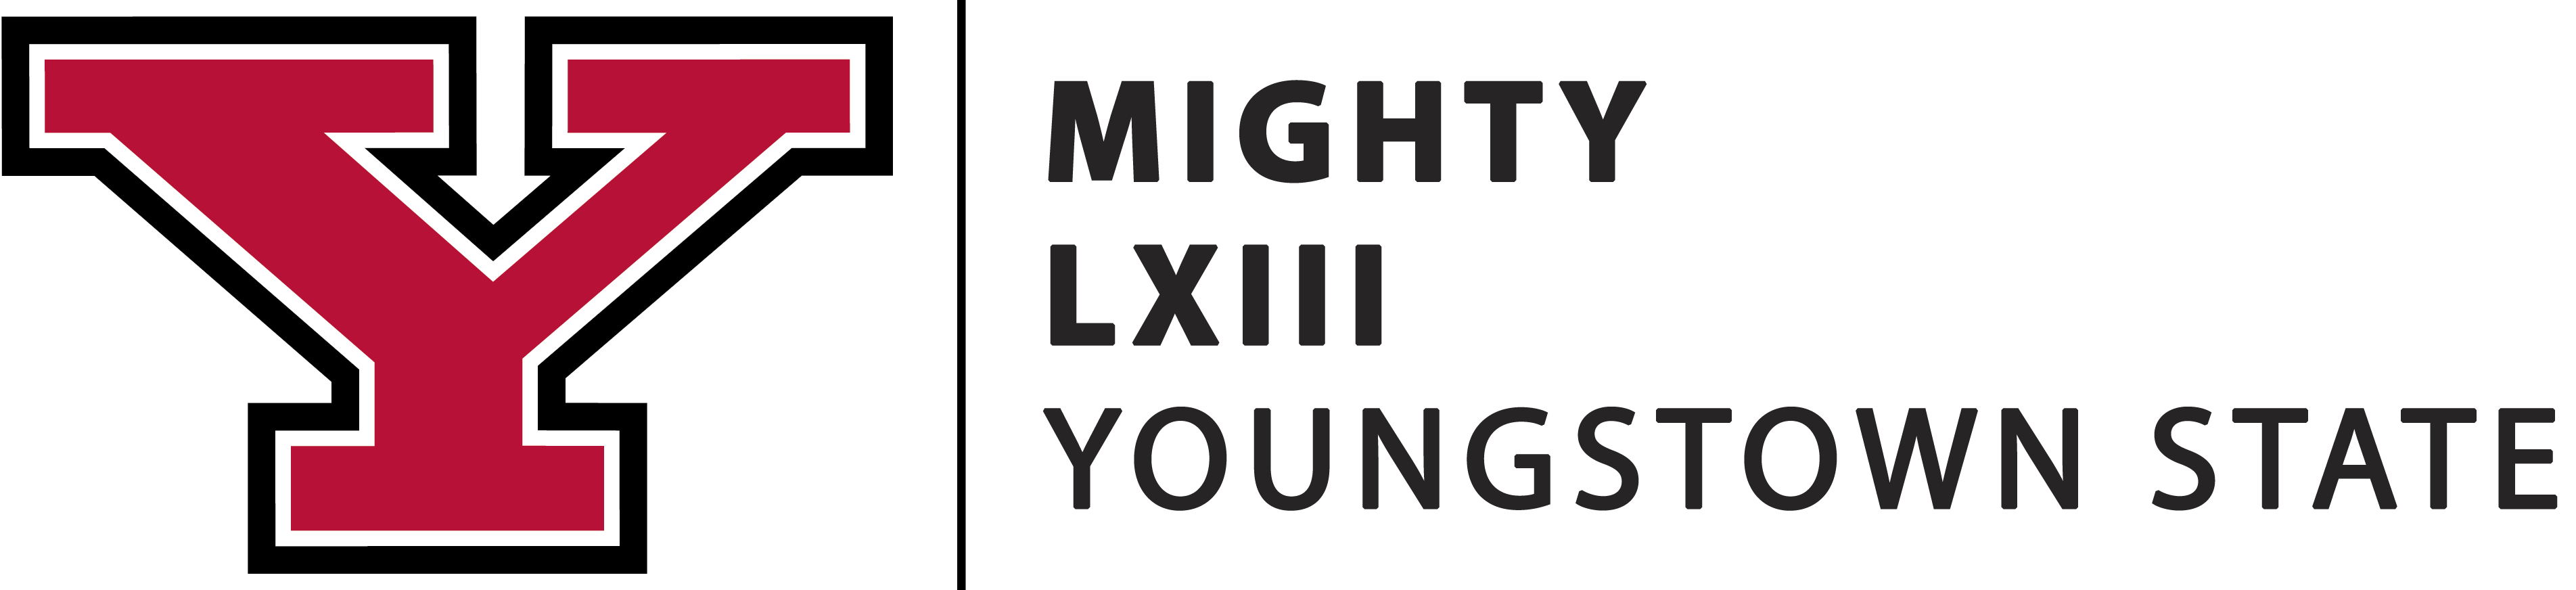 MIGHTY LXII